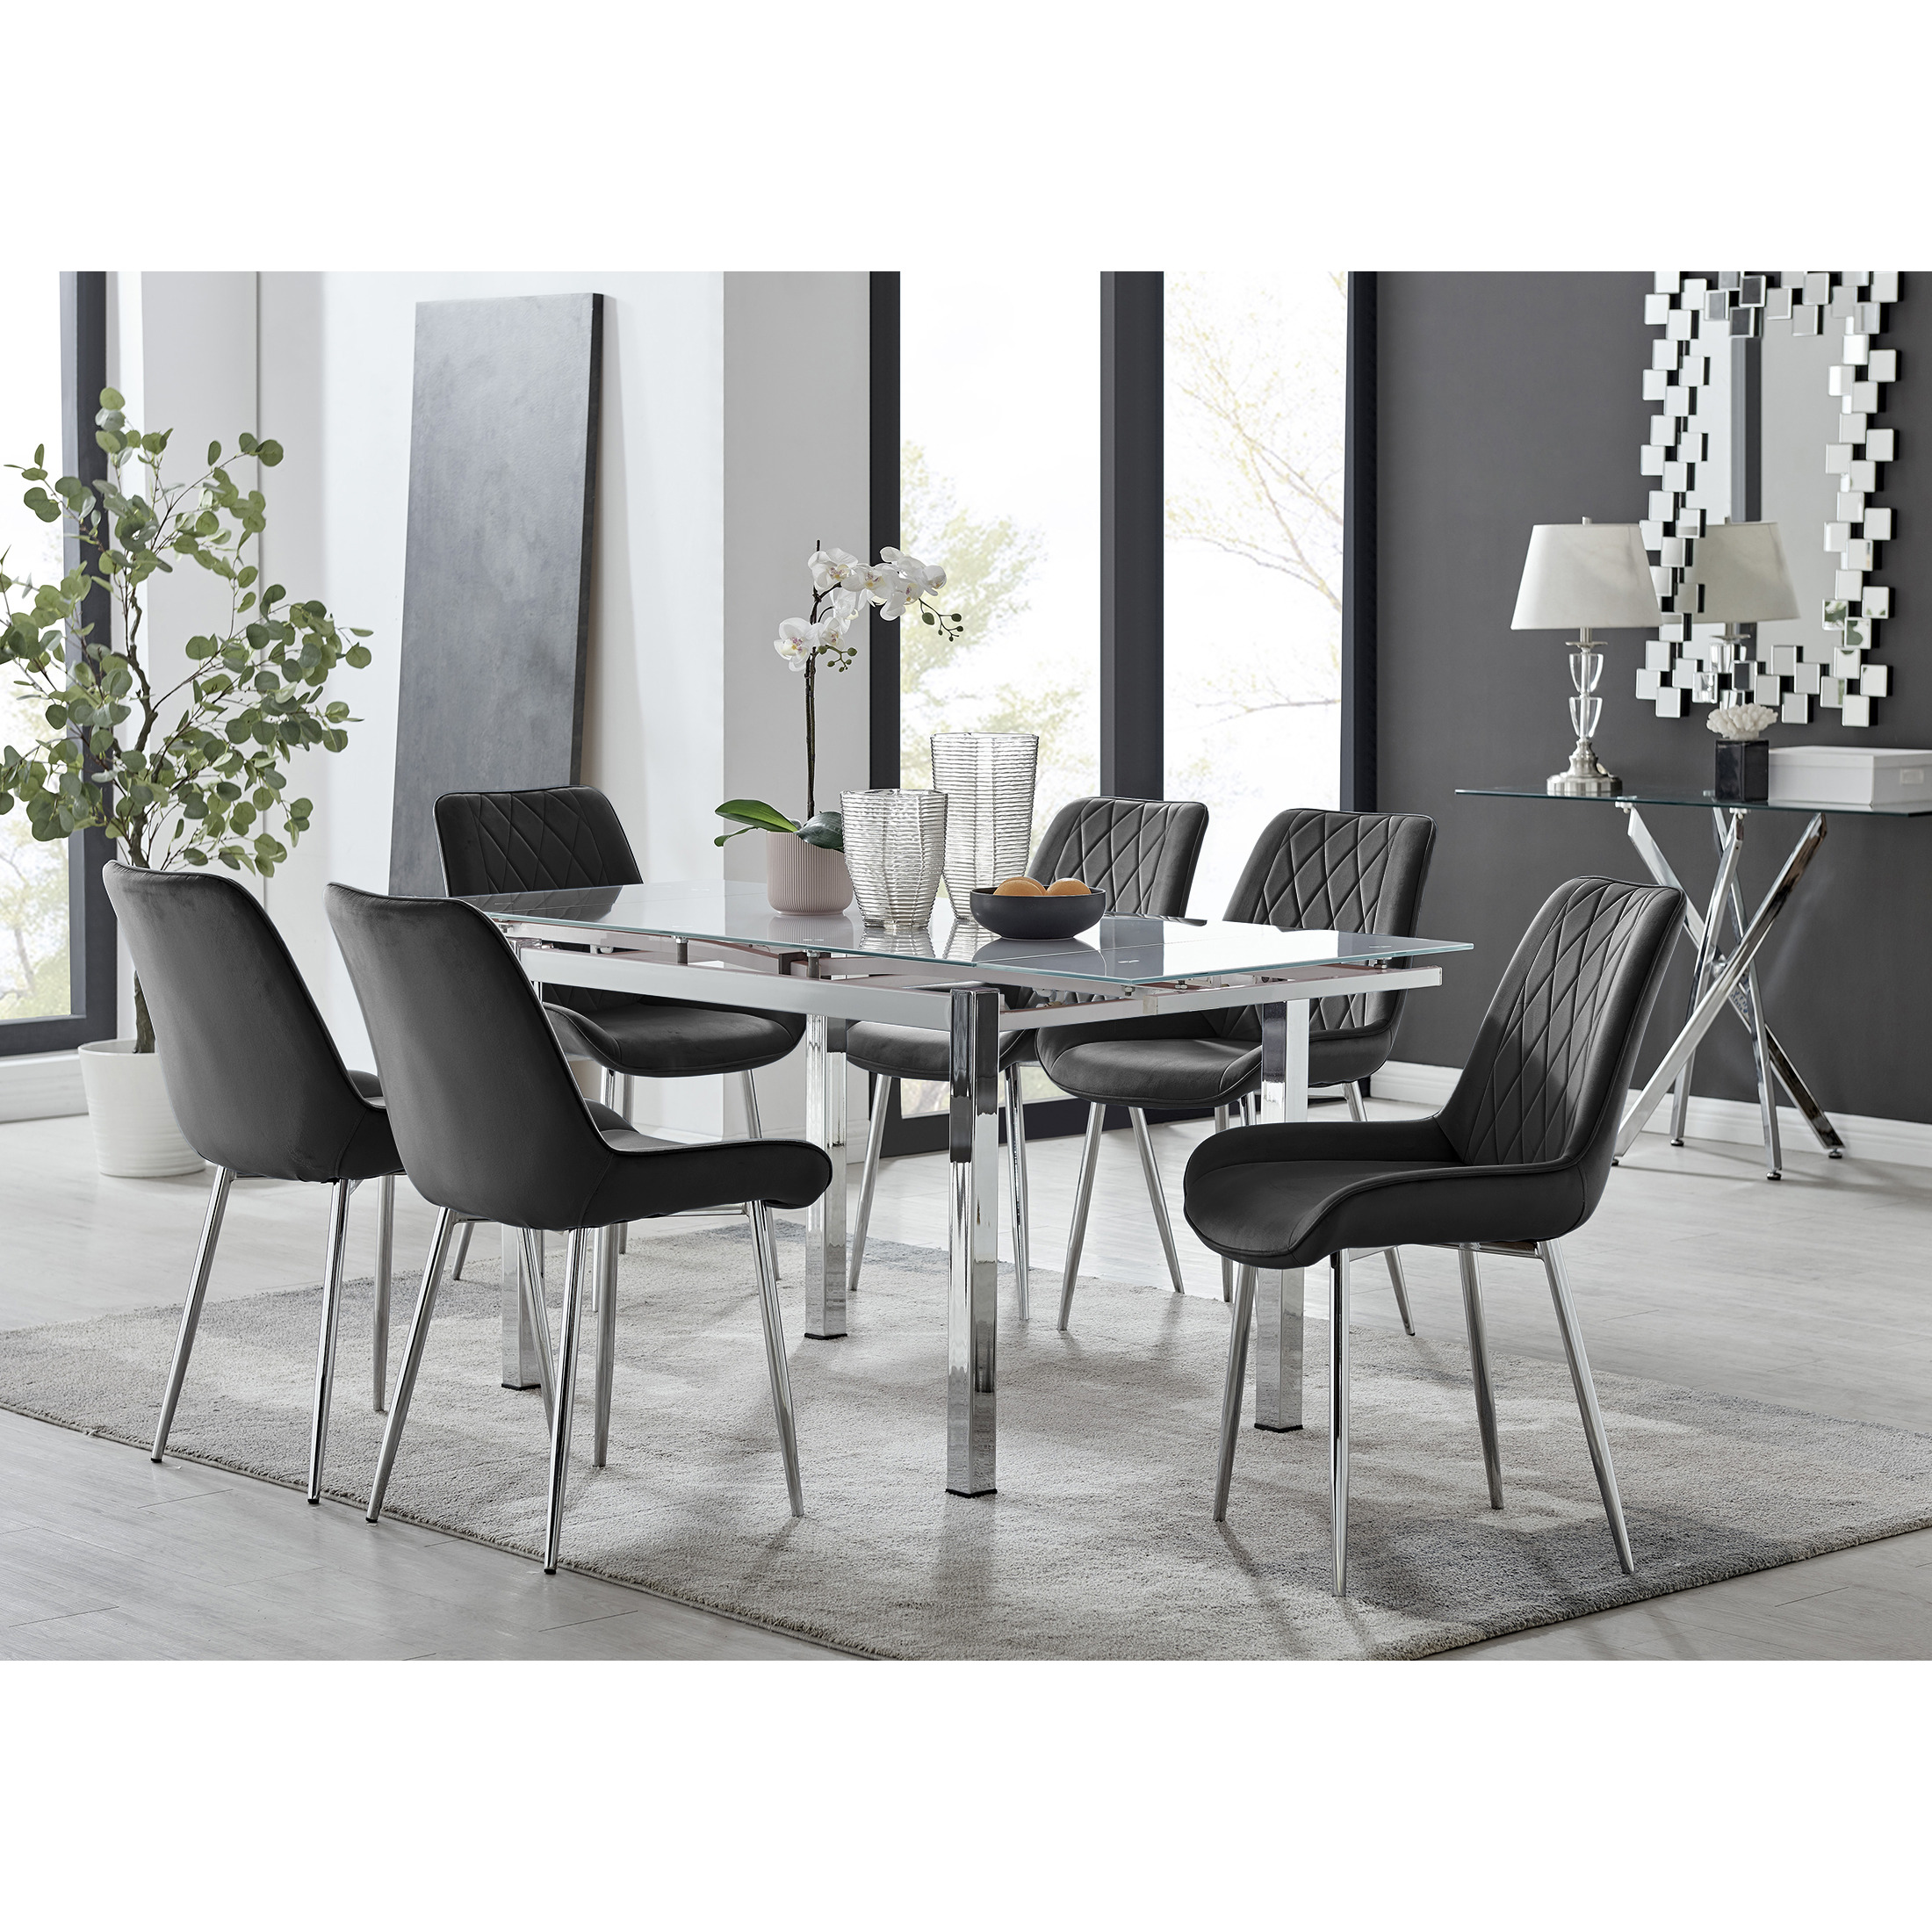 Enna White Glass Extending Dining Table and 6 Pesaro Silver Leg Chairs - Furniturebox